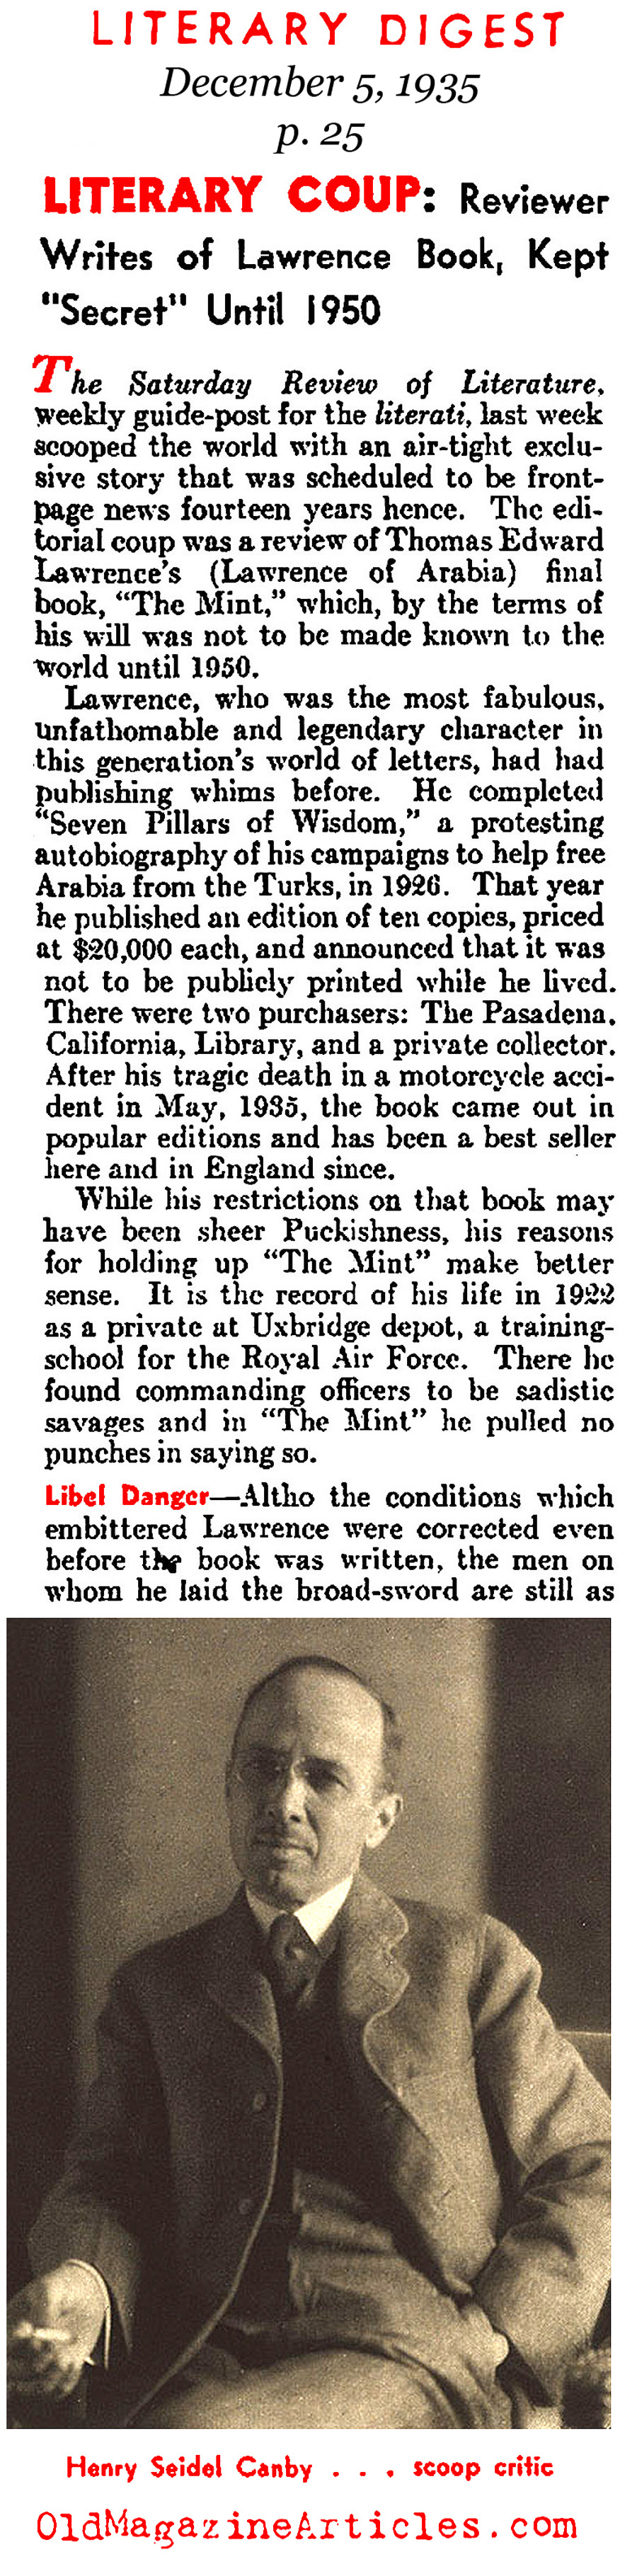 T.E. Lawrence and the Literary Coup of 1935 (Literary Digest, 1935)